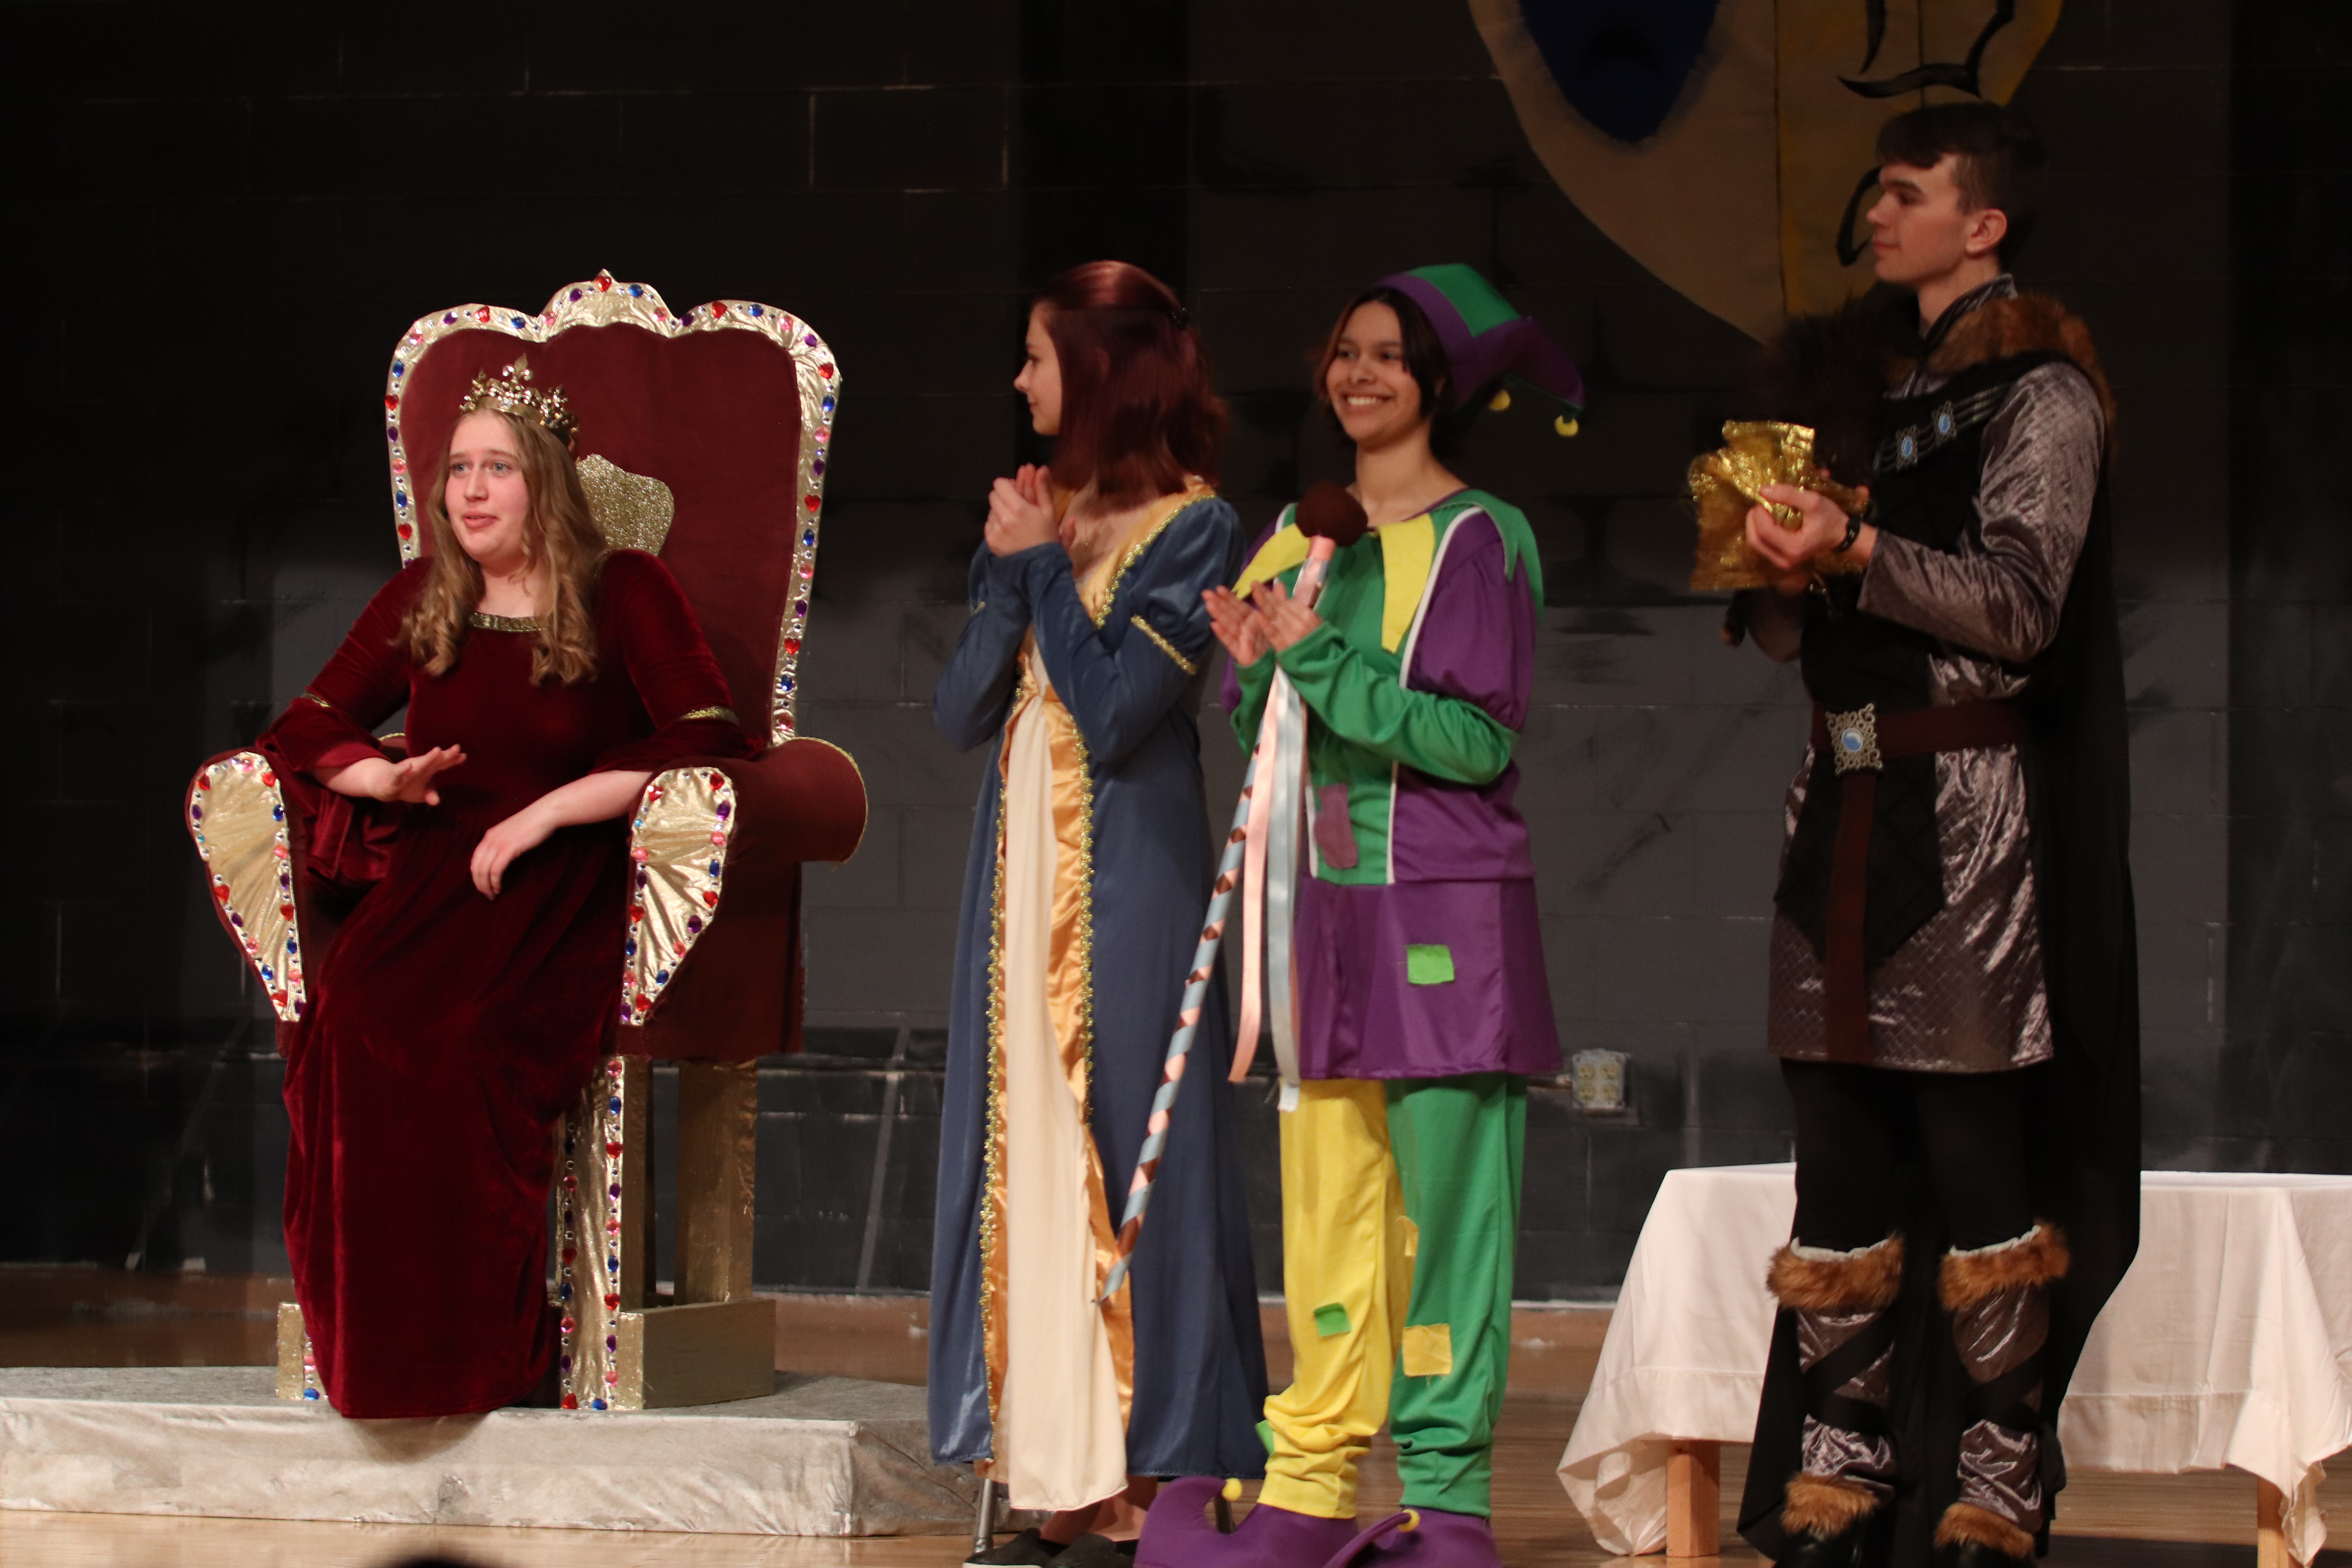 The Queen played by Kaylee Radtke, says something and Morgan Rorex as Lady Matilda, Sage Huerta as the Jester, and Joseph Vankuiken as the Huntsman all applaud in agreement and praise. /Jovi Anderson • The Brand